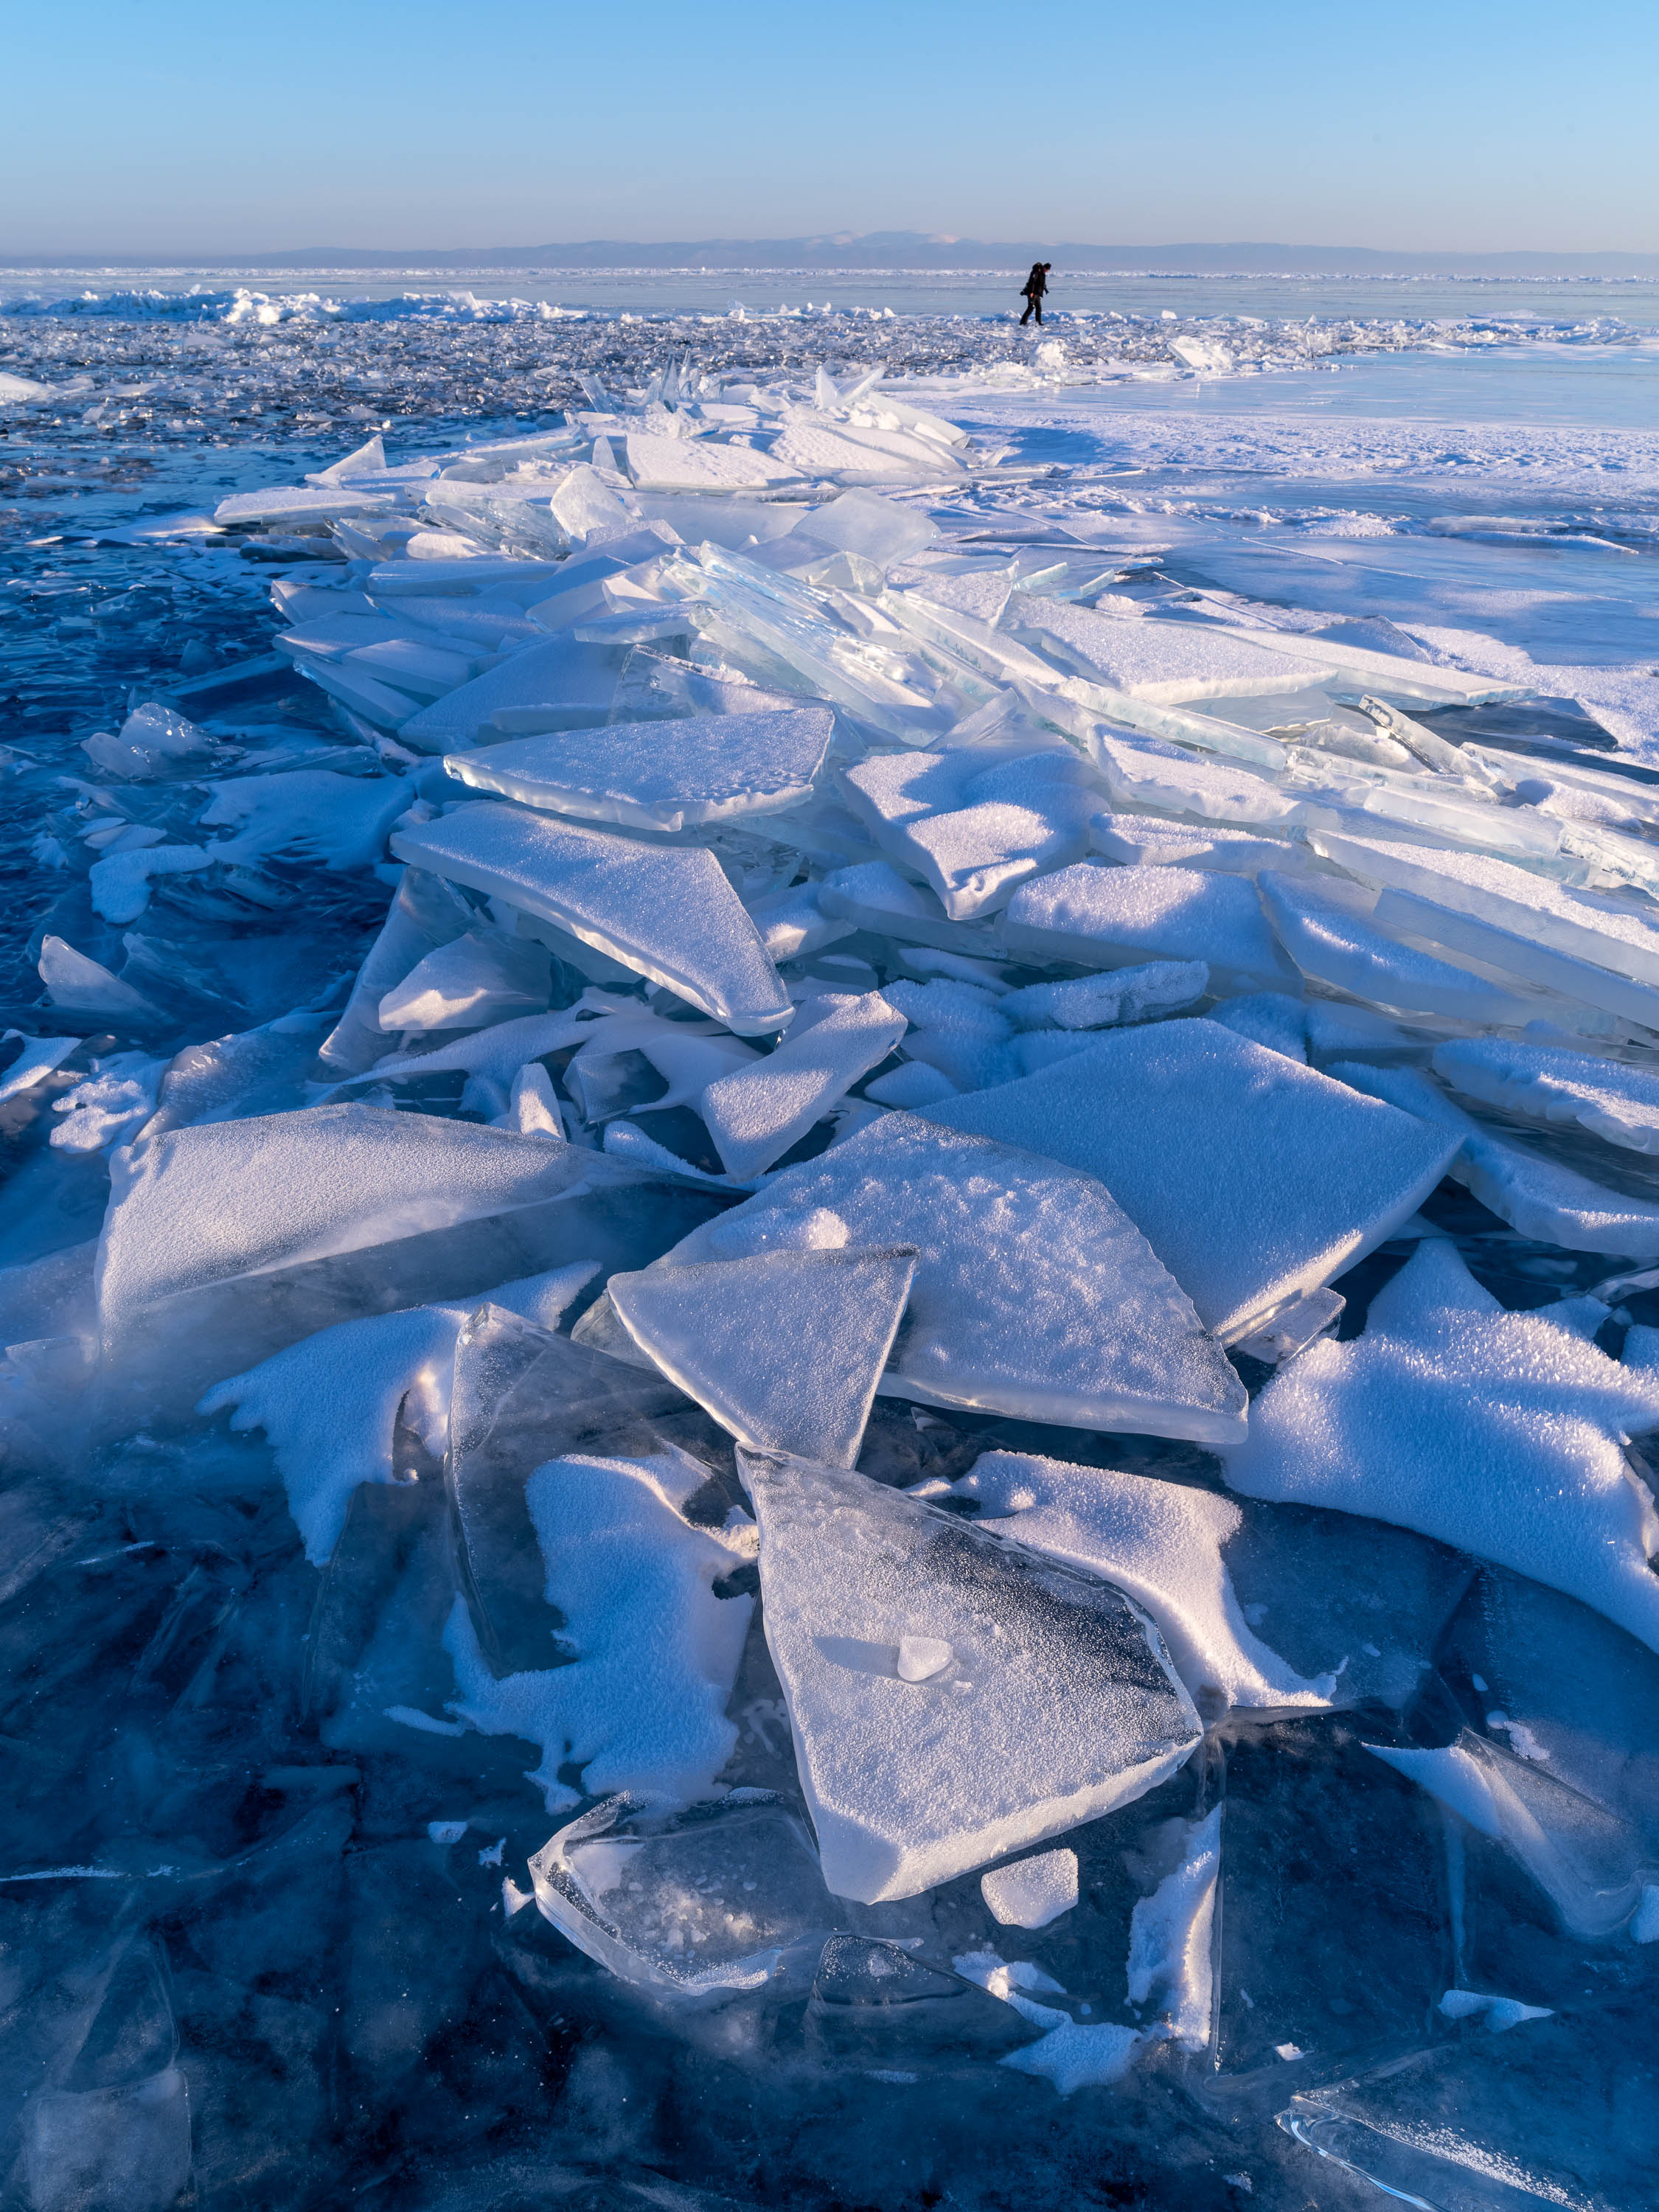 Crystalline glass-like ice pieces on a fully snow-covered land, Lake Baikal #12, Siberia, Russia